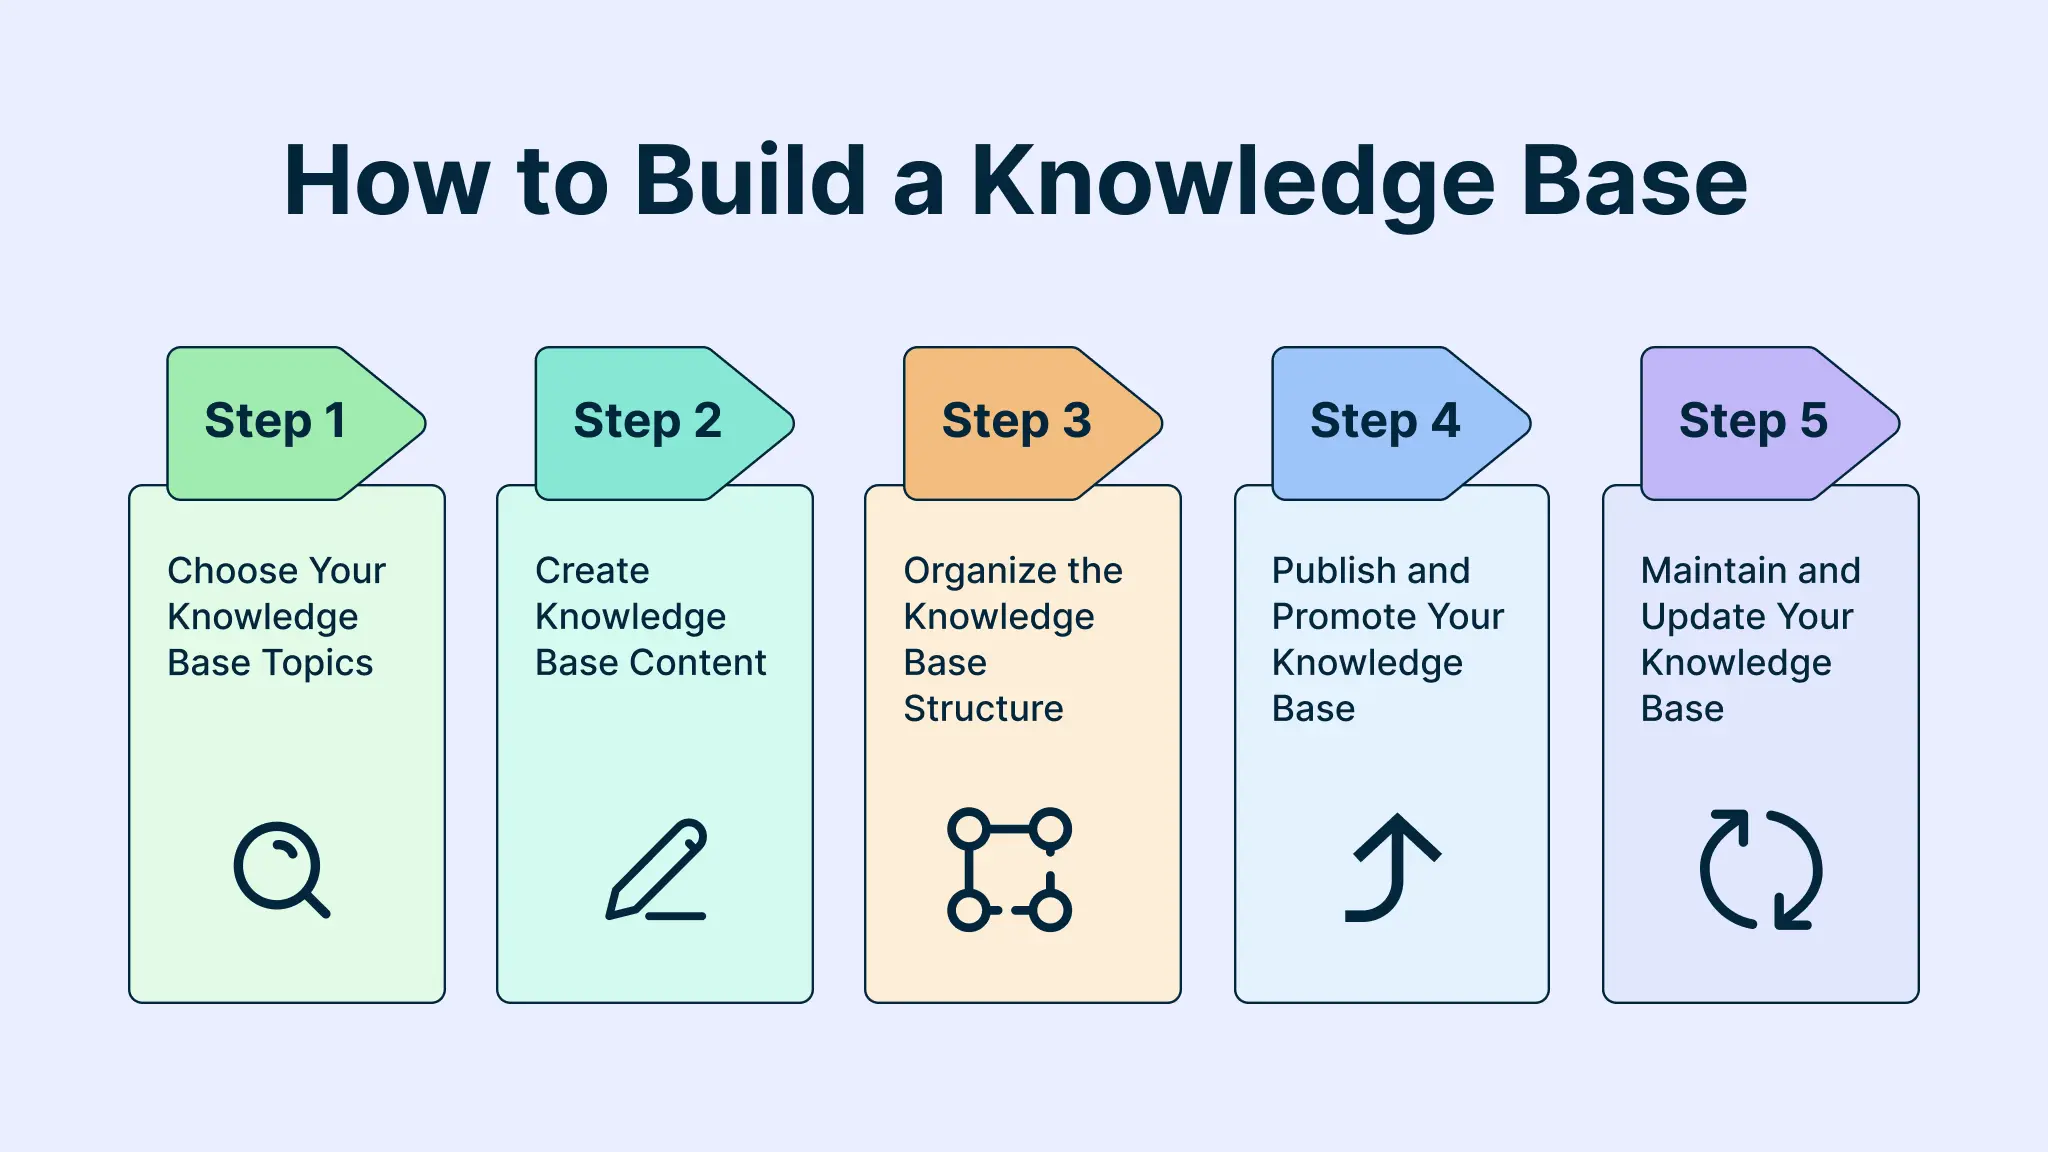 How to build a knowledge base